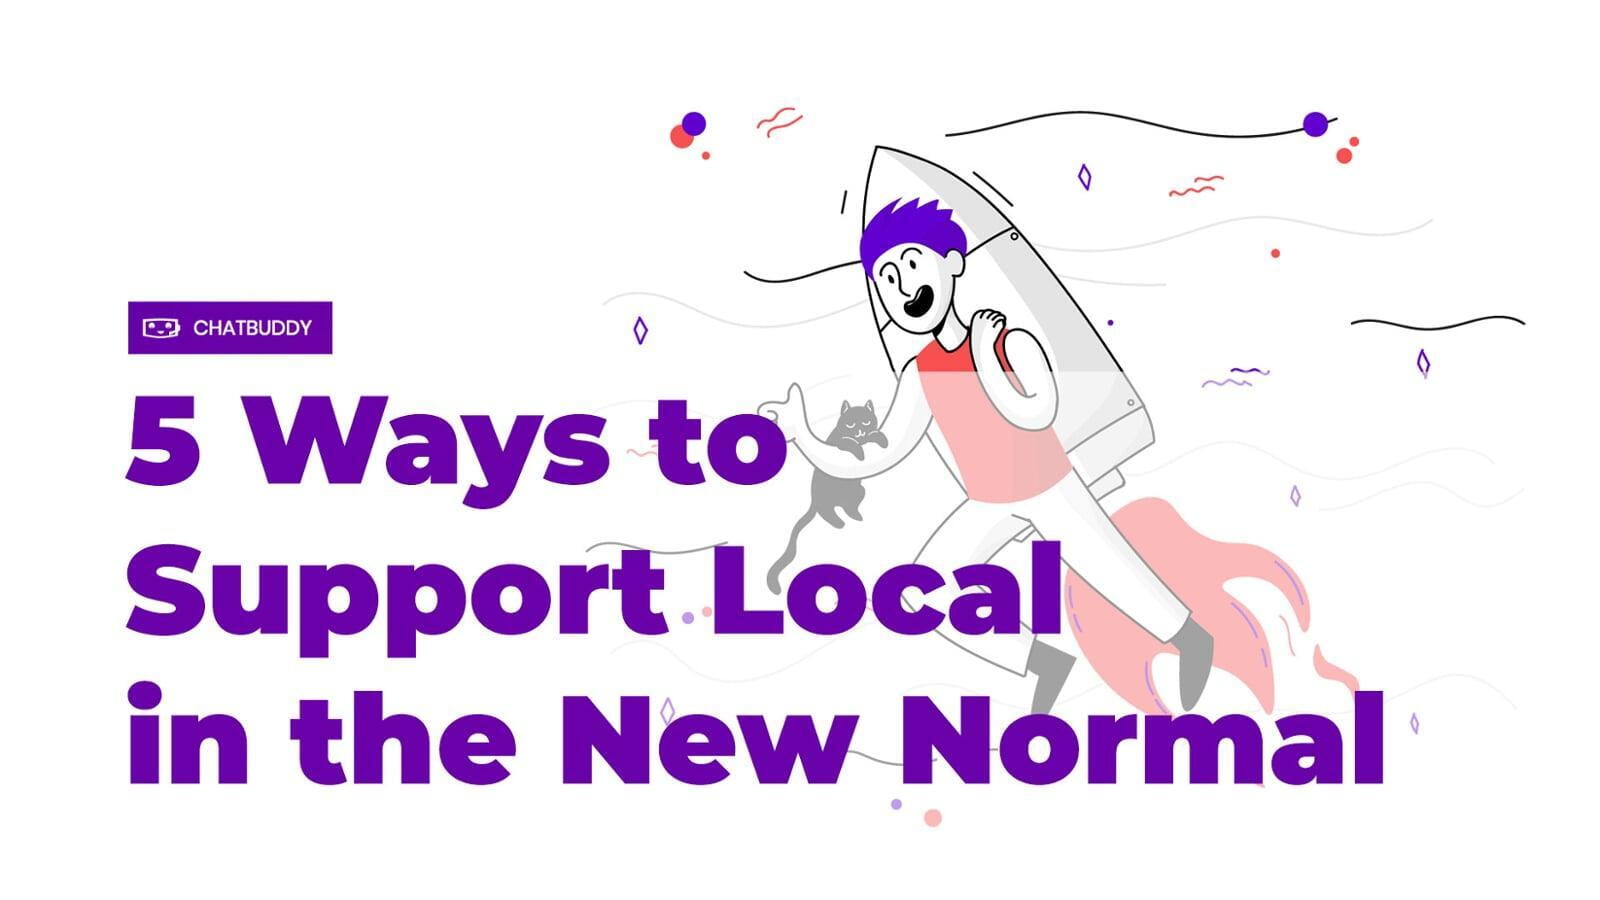 5 Ways to Support Local in the New Normal